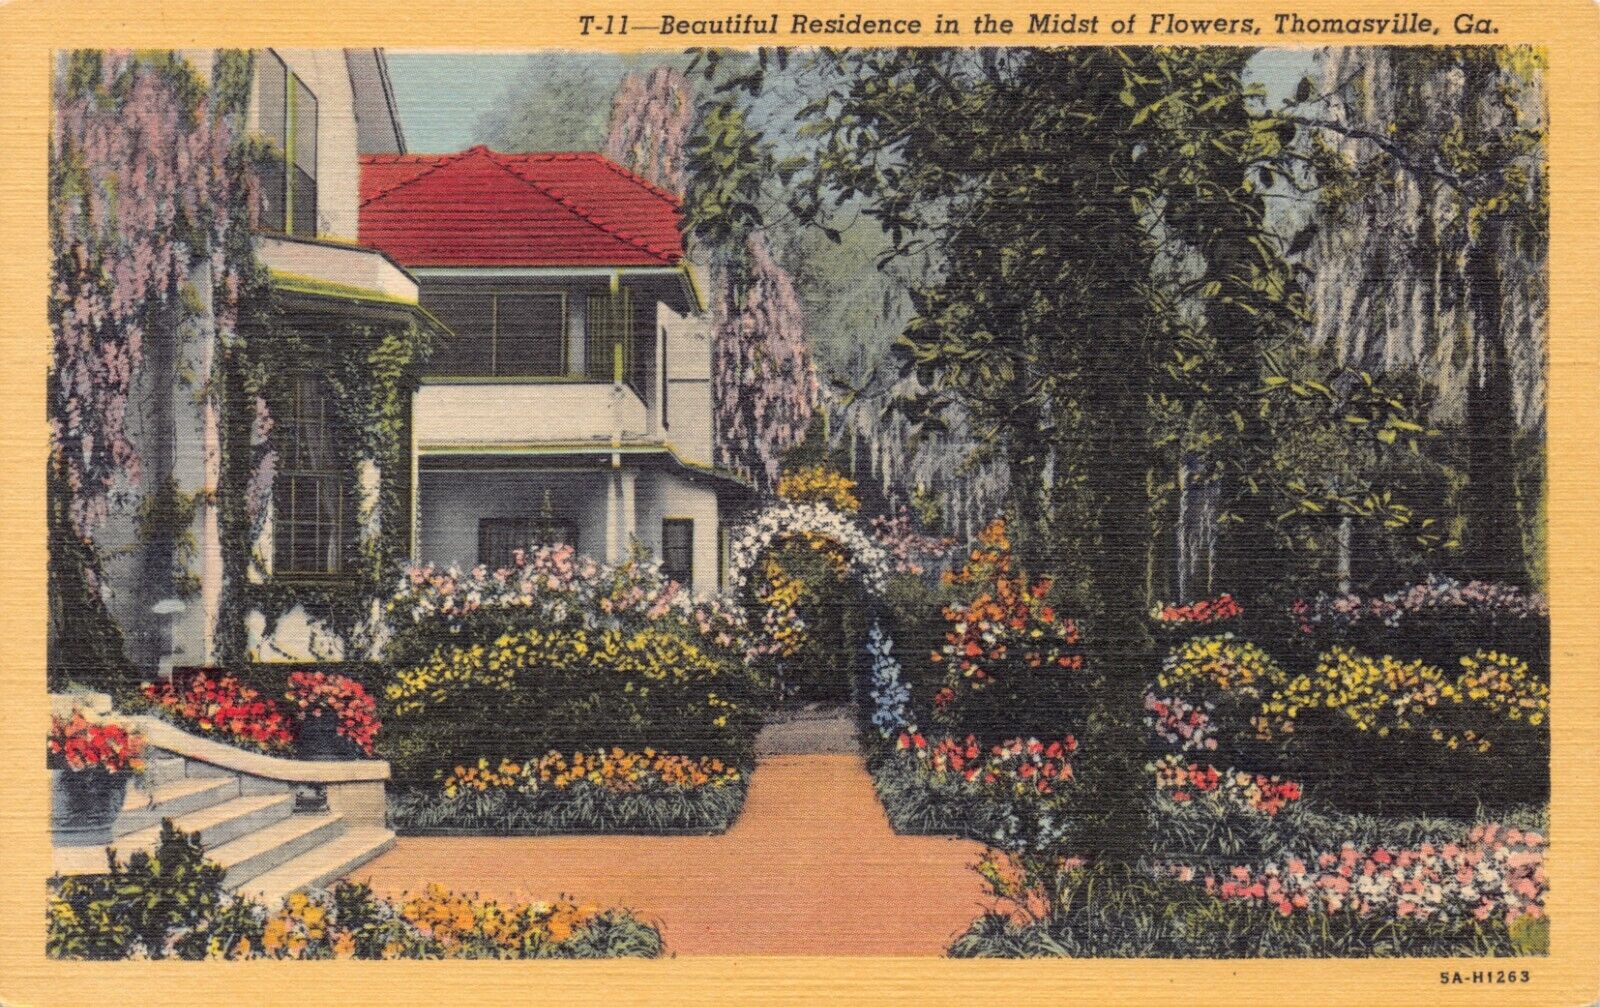 GA~GEORGIA~THOMASVILLE~BEAUTIFUL RESIDENCE IN THE MIDST OF FLOWERS~C.1942